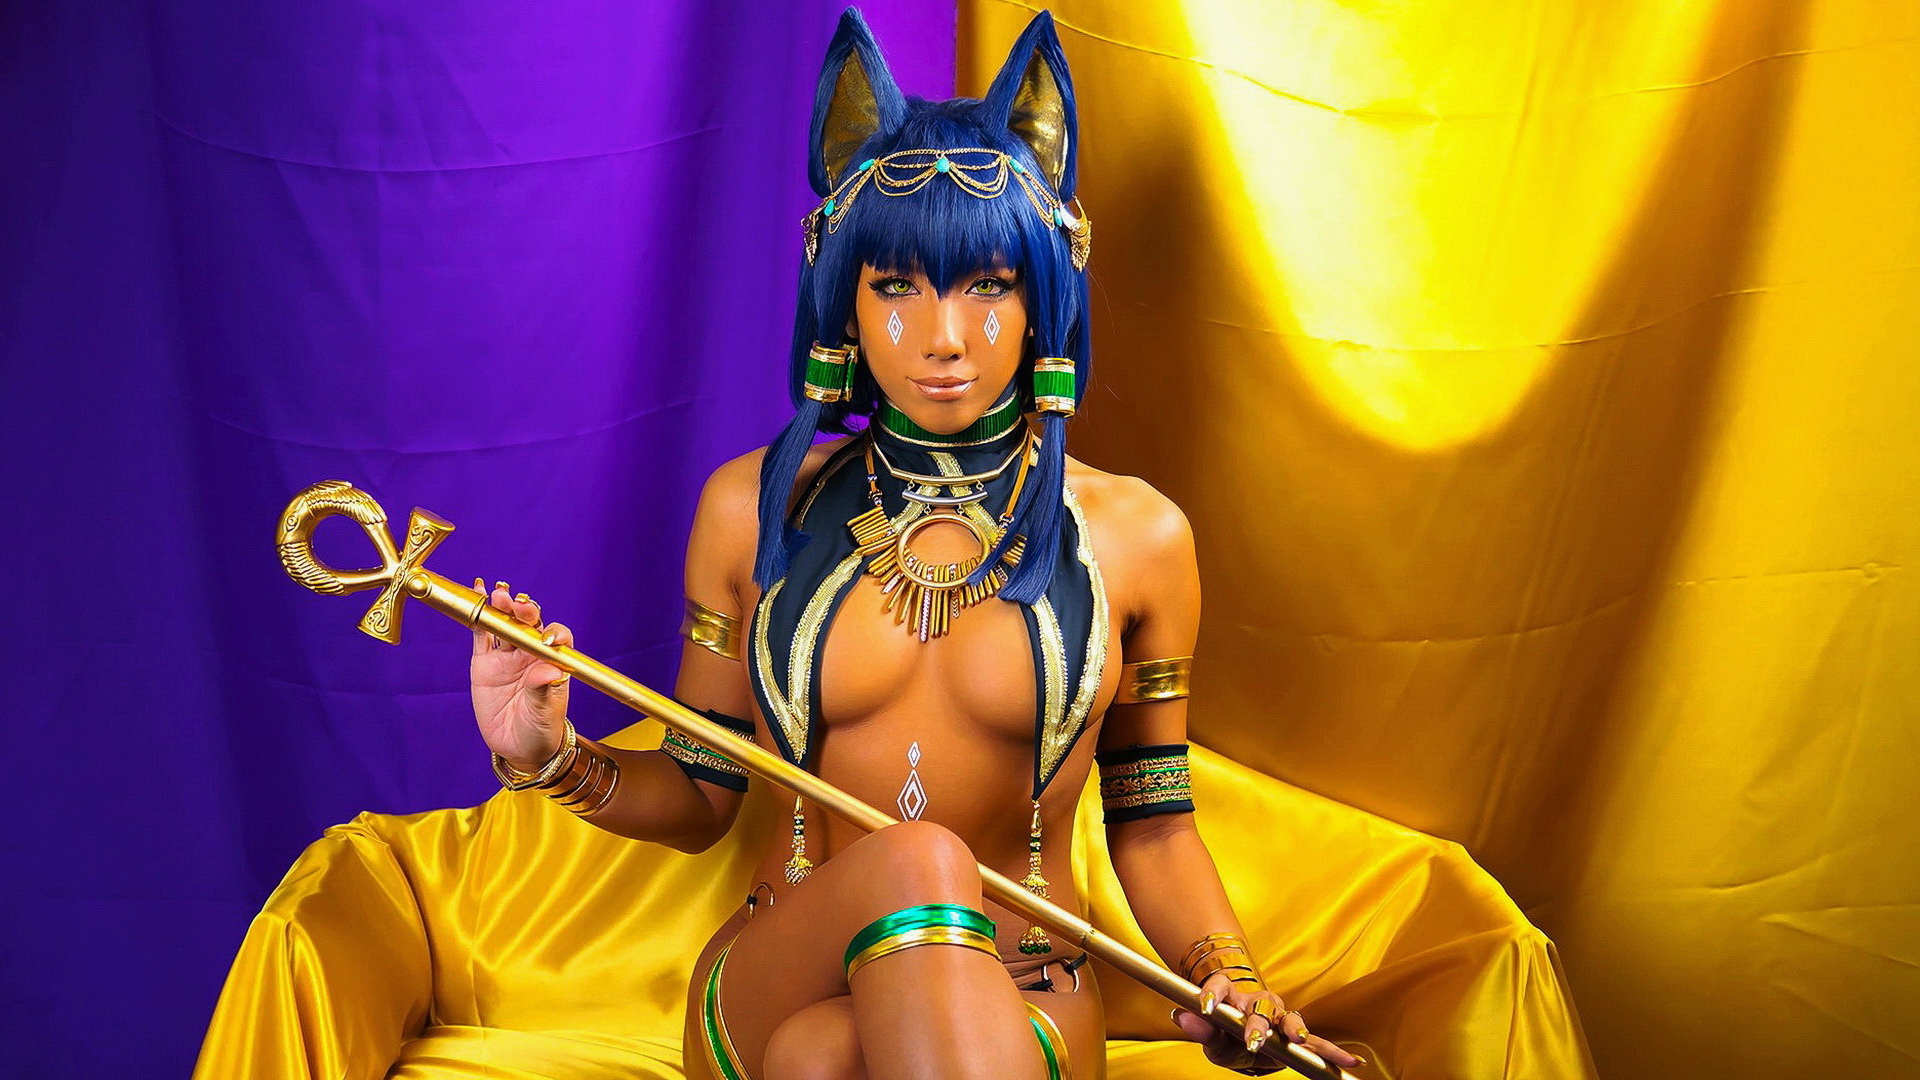 Cosplay the capricious Egyptian goddess Bastet sits on her throne